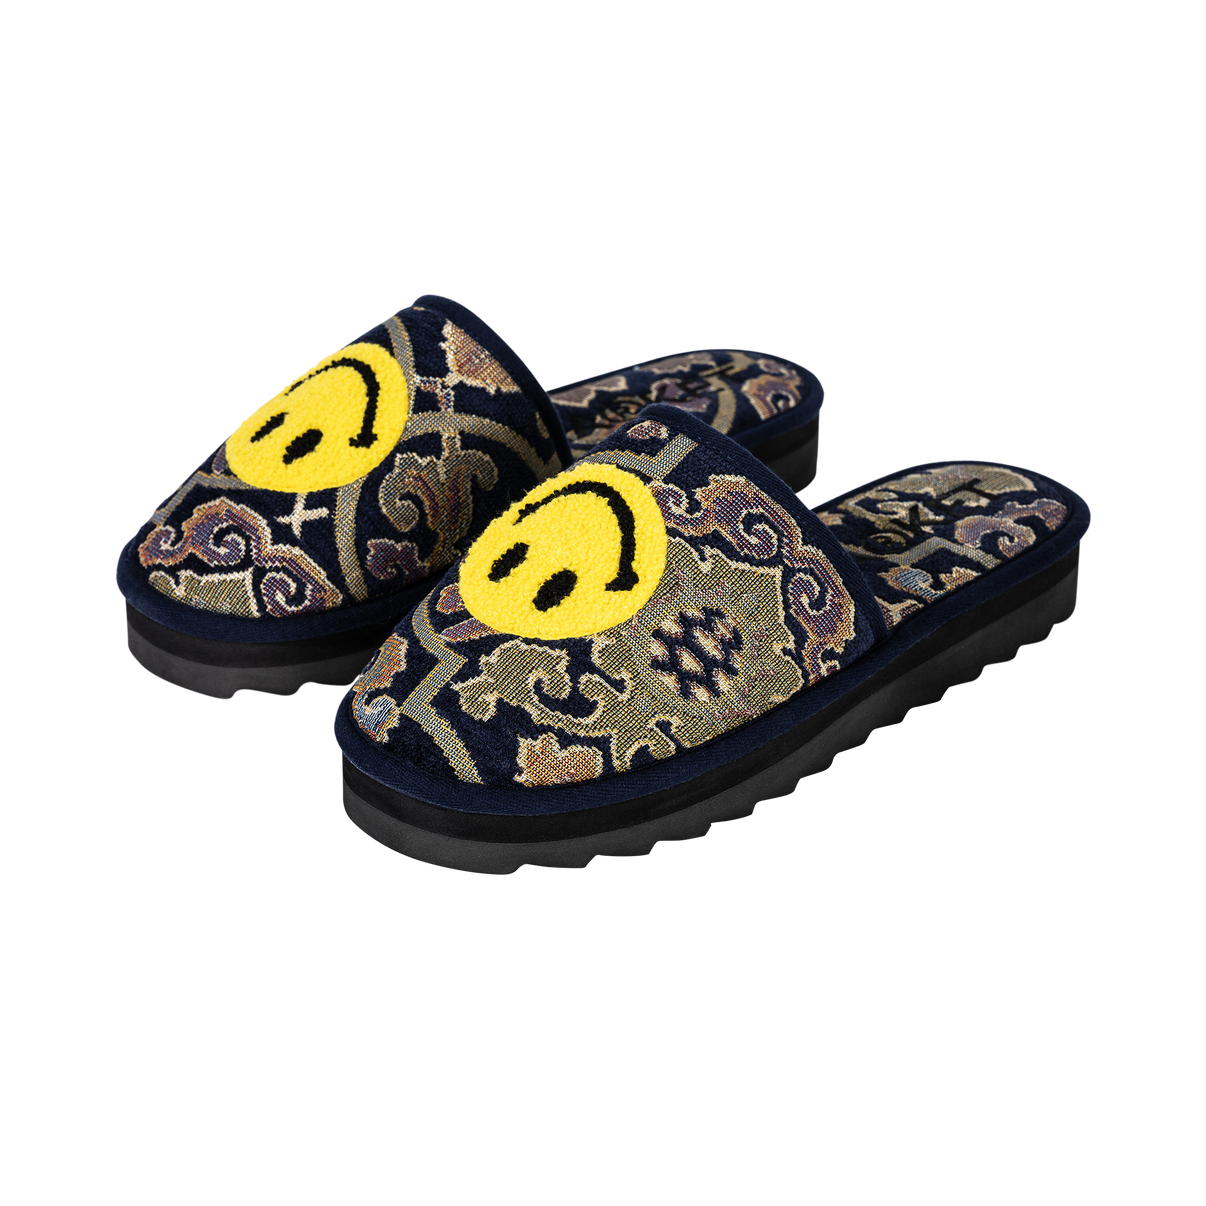 Smiley Upside Down Hotel Slippers - Blue